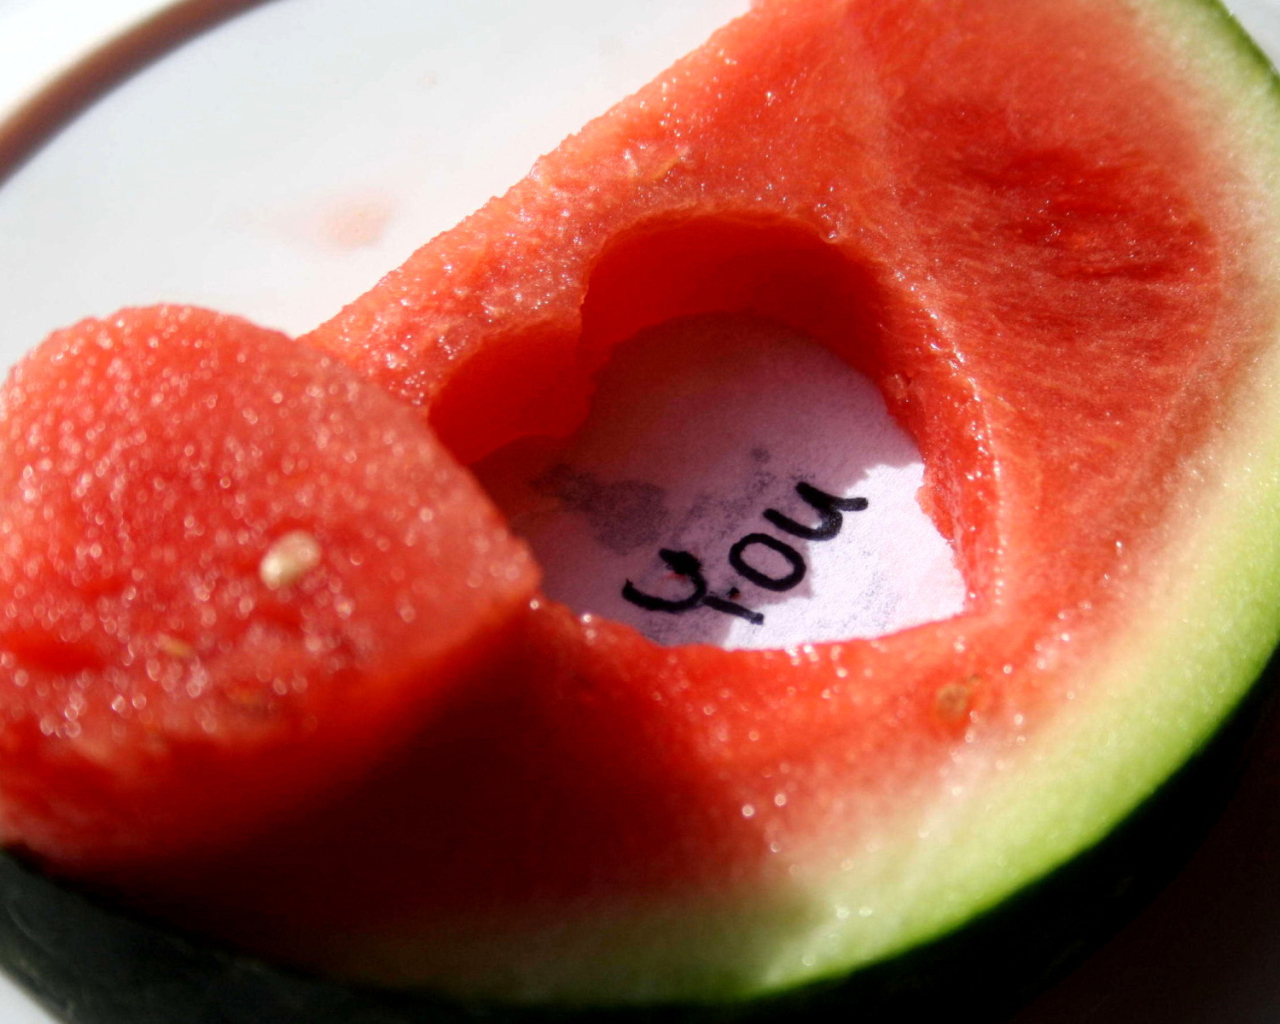 Heart of watermelon on Valentine's Day February 14